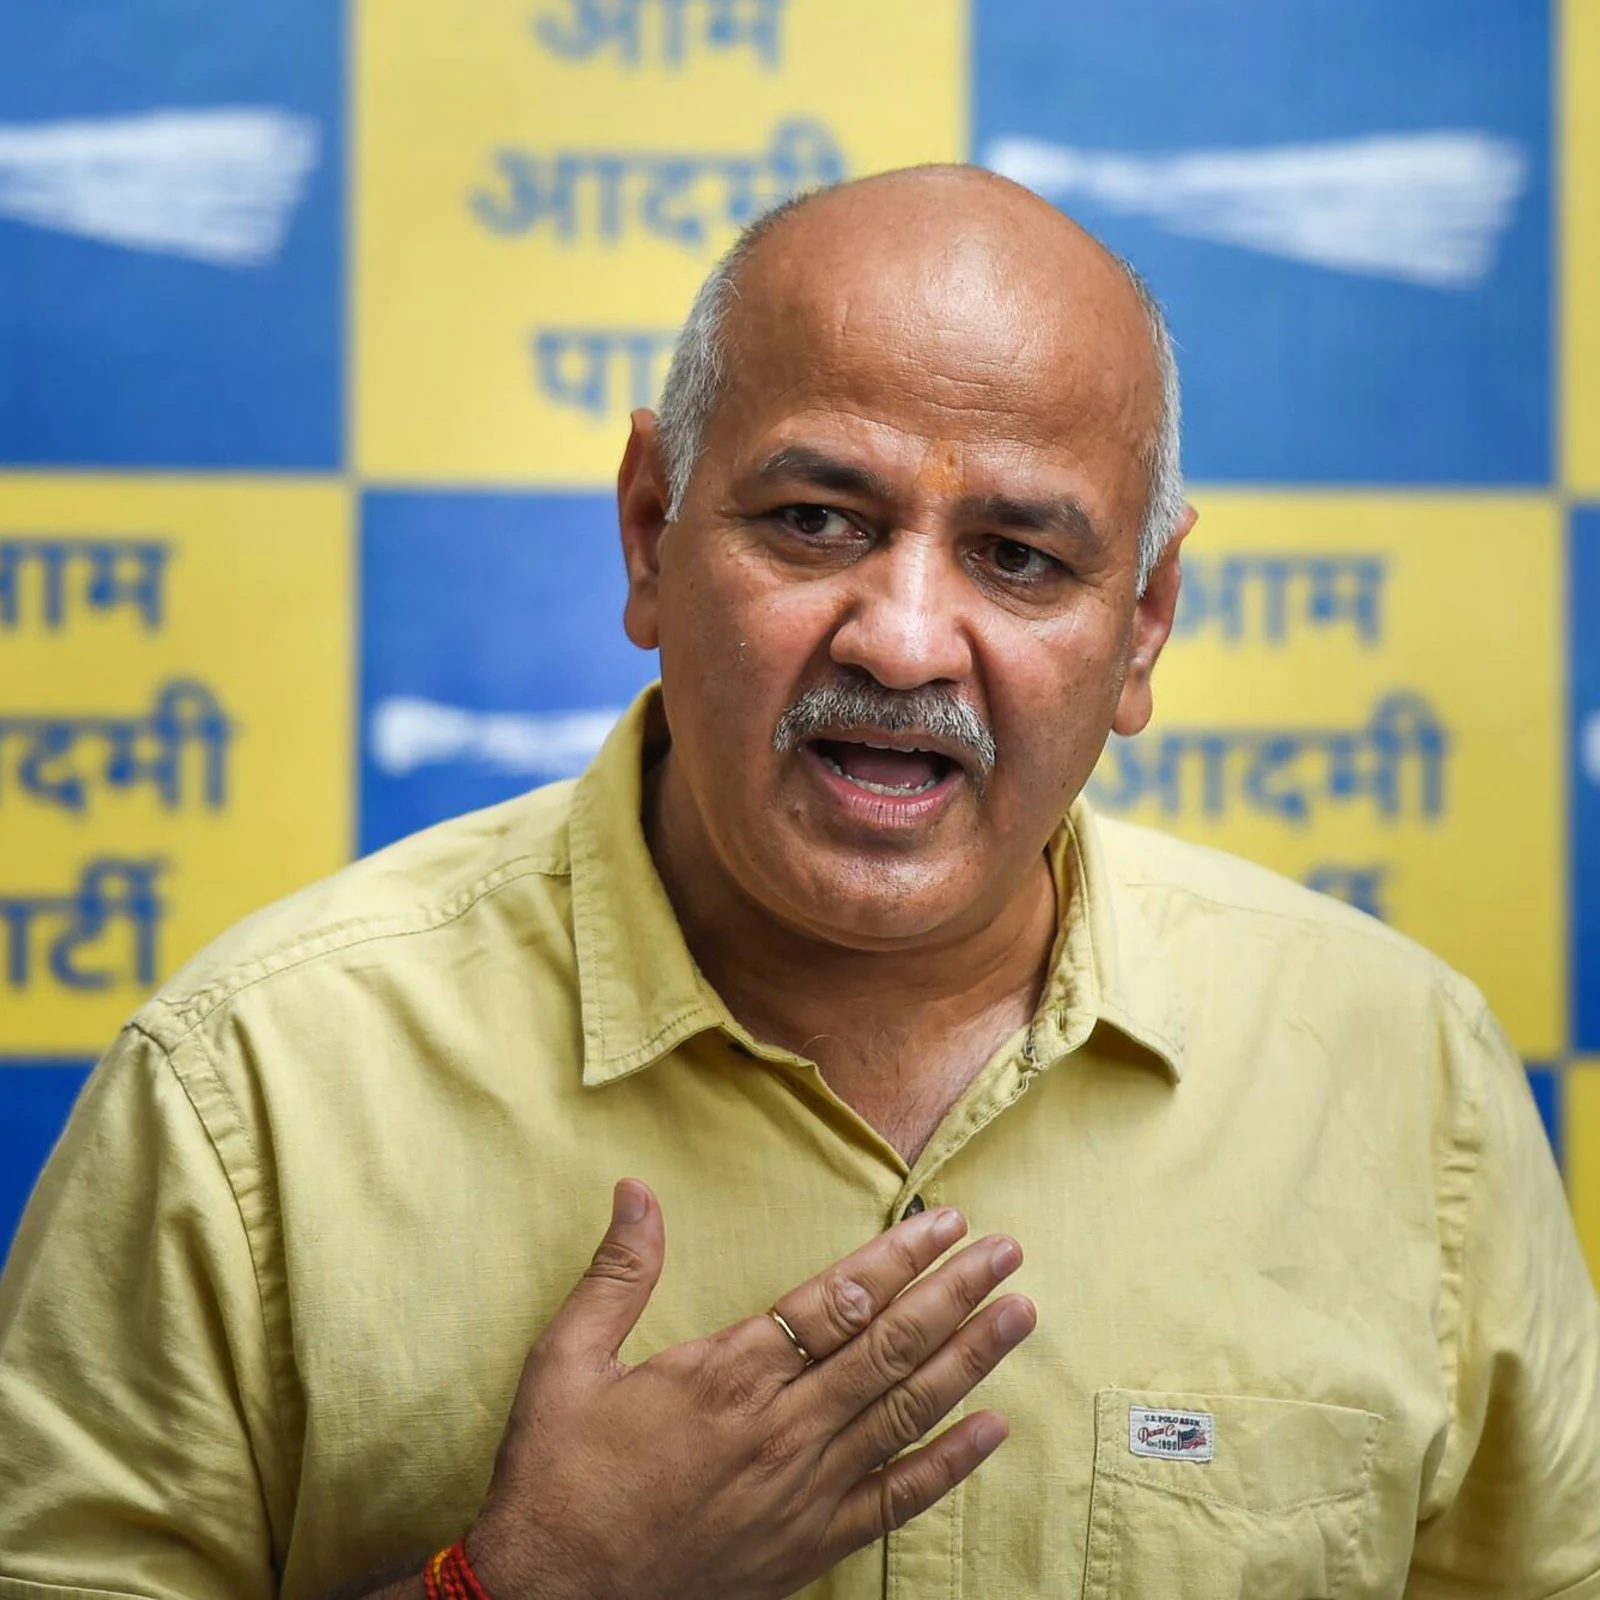 Deputy CM, Manish Sisodia on Saturday in a press conference said, “BJP members should read the jail manual before throwing allegations such as this around.”